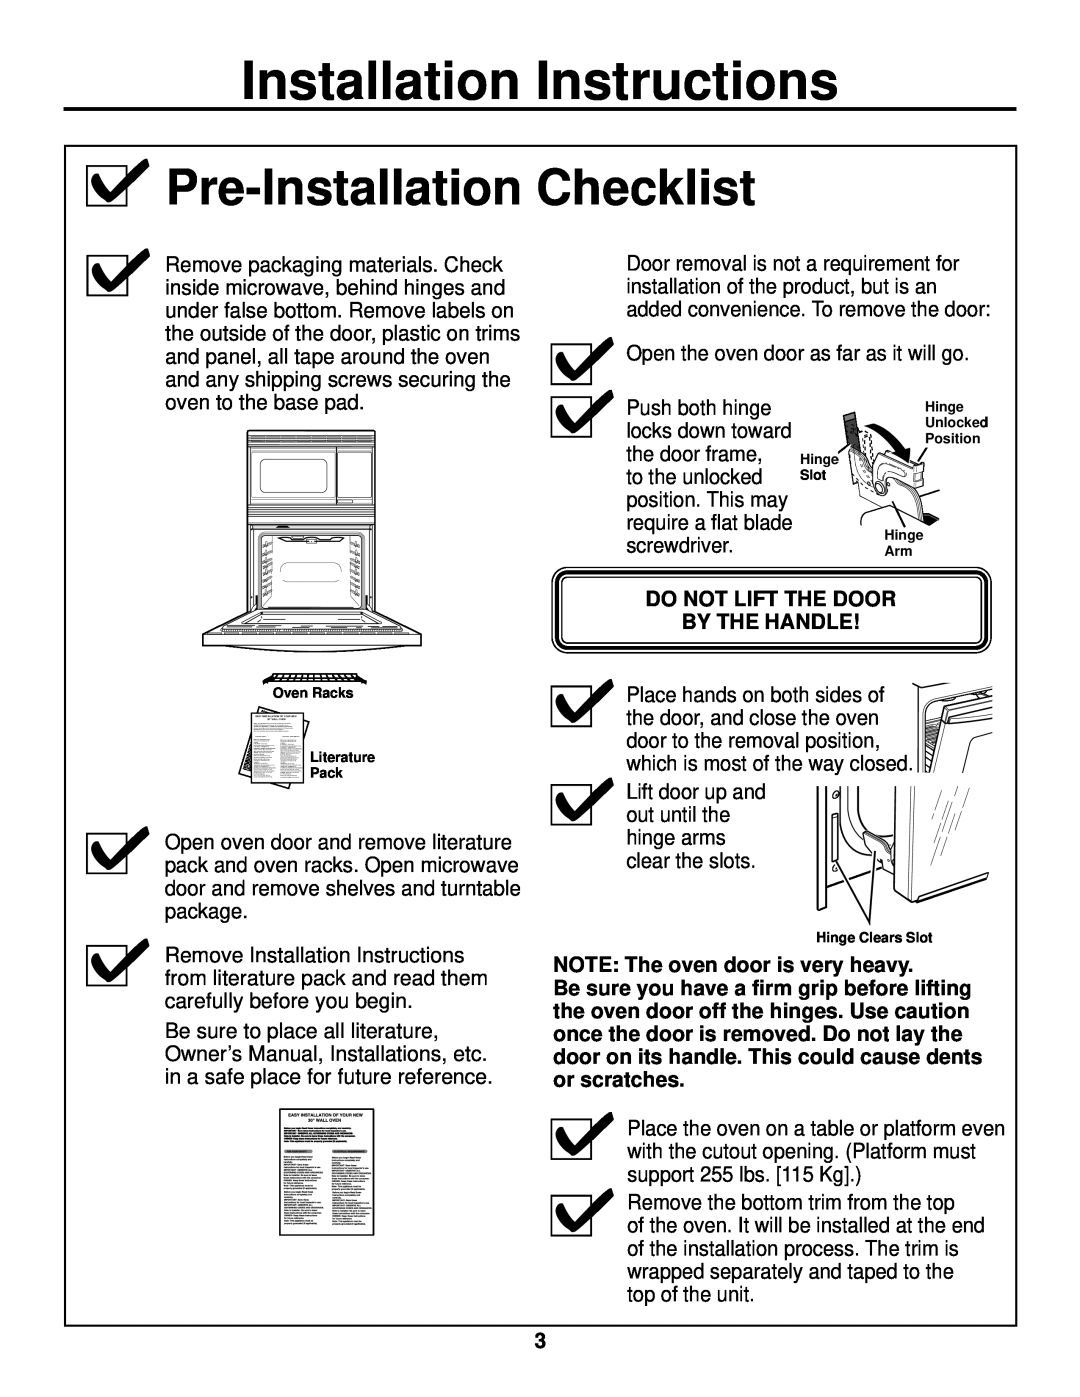 GE JTP90, JKP90 Pre-InstallationChecklist, Installation Instructions, Do Not Lift The Door By The Handle 